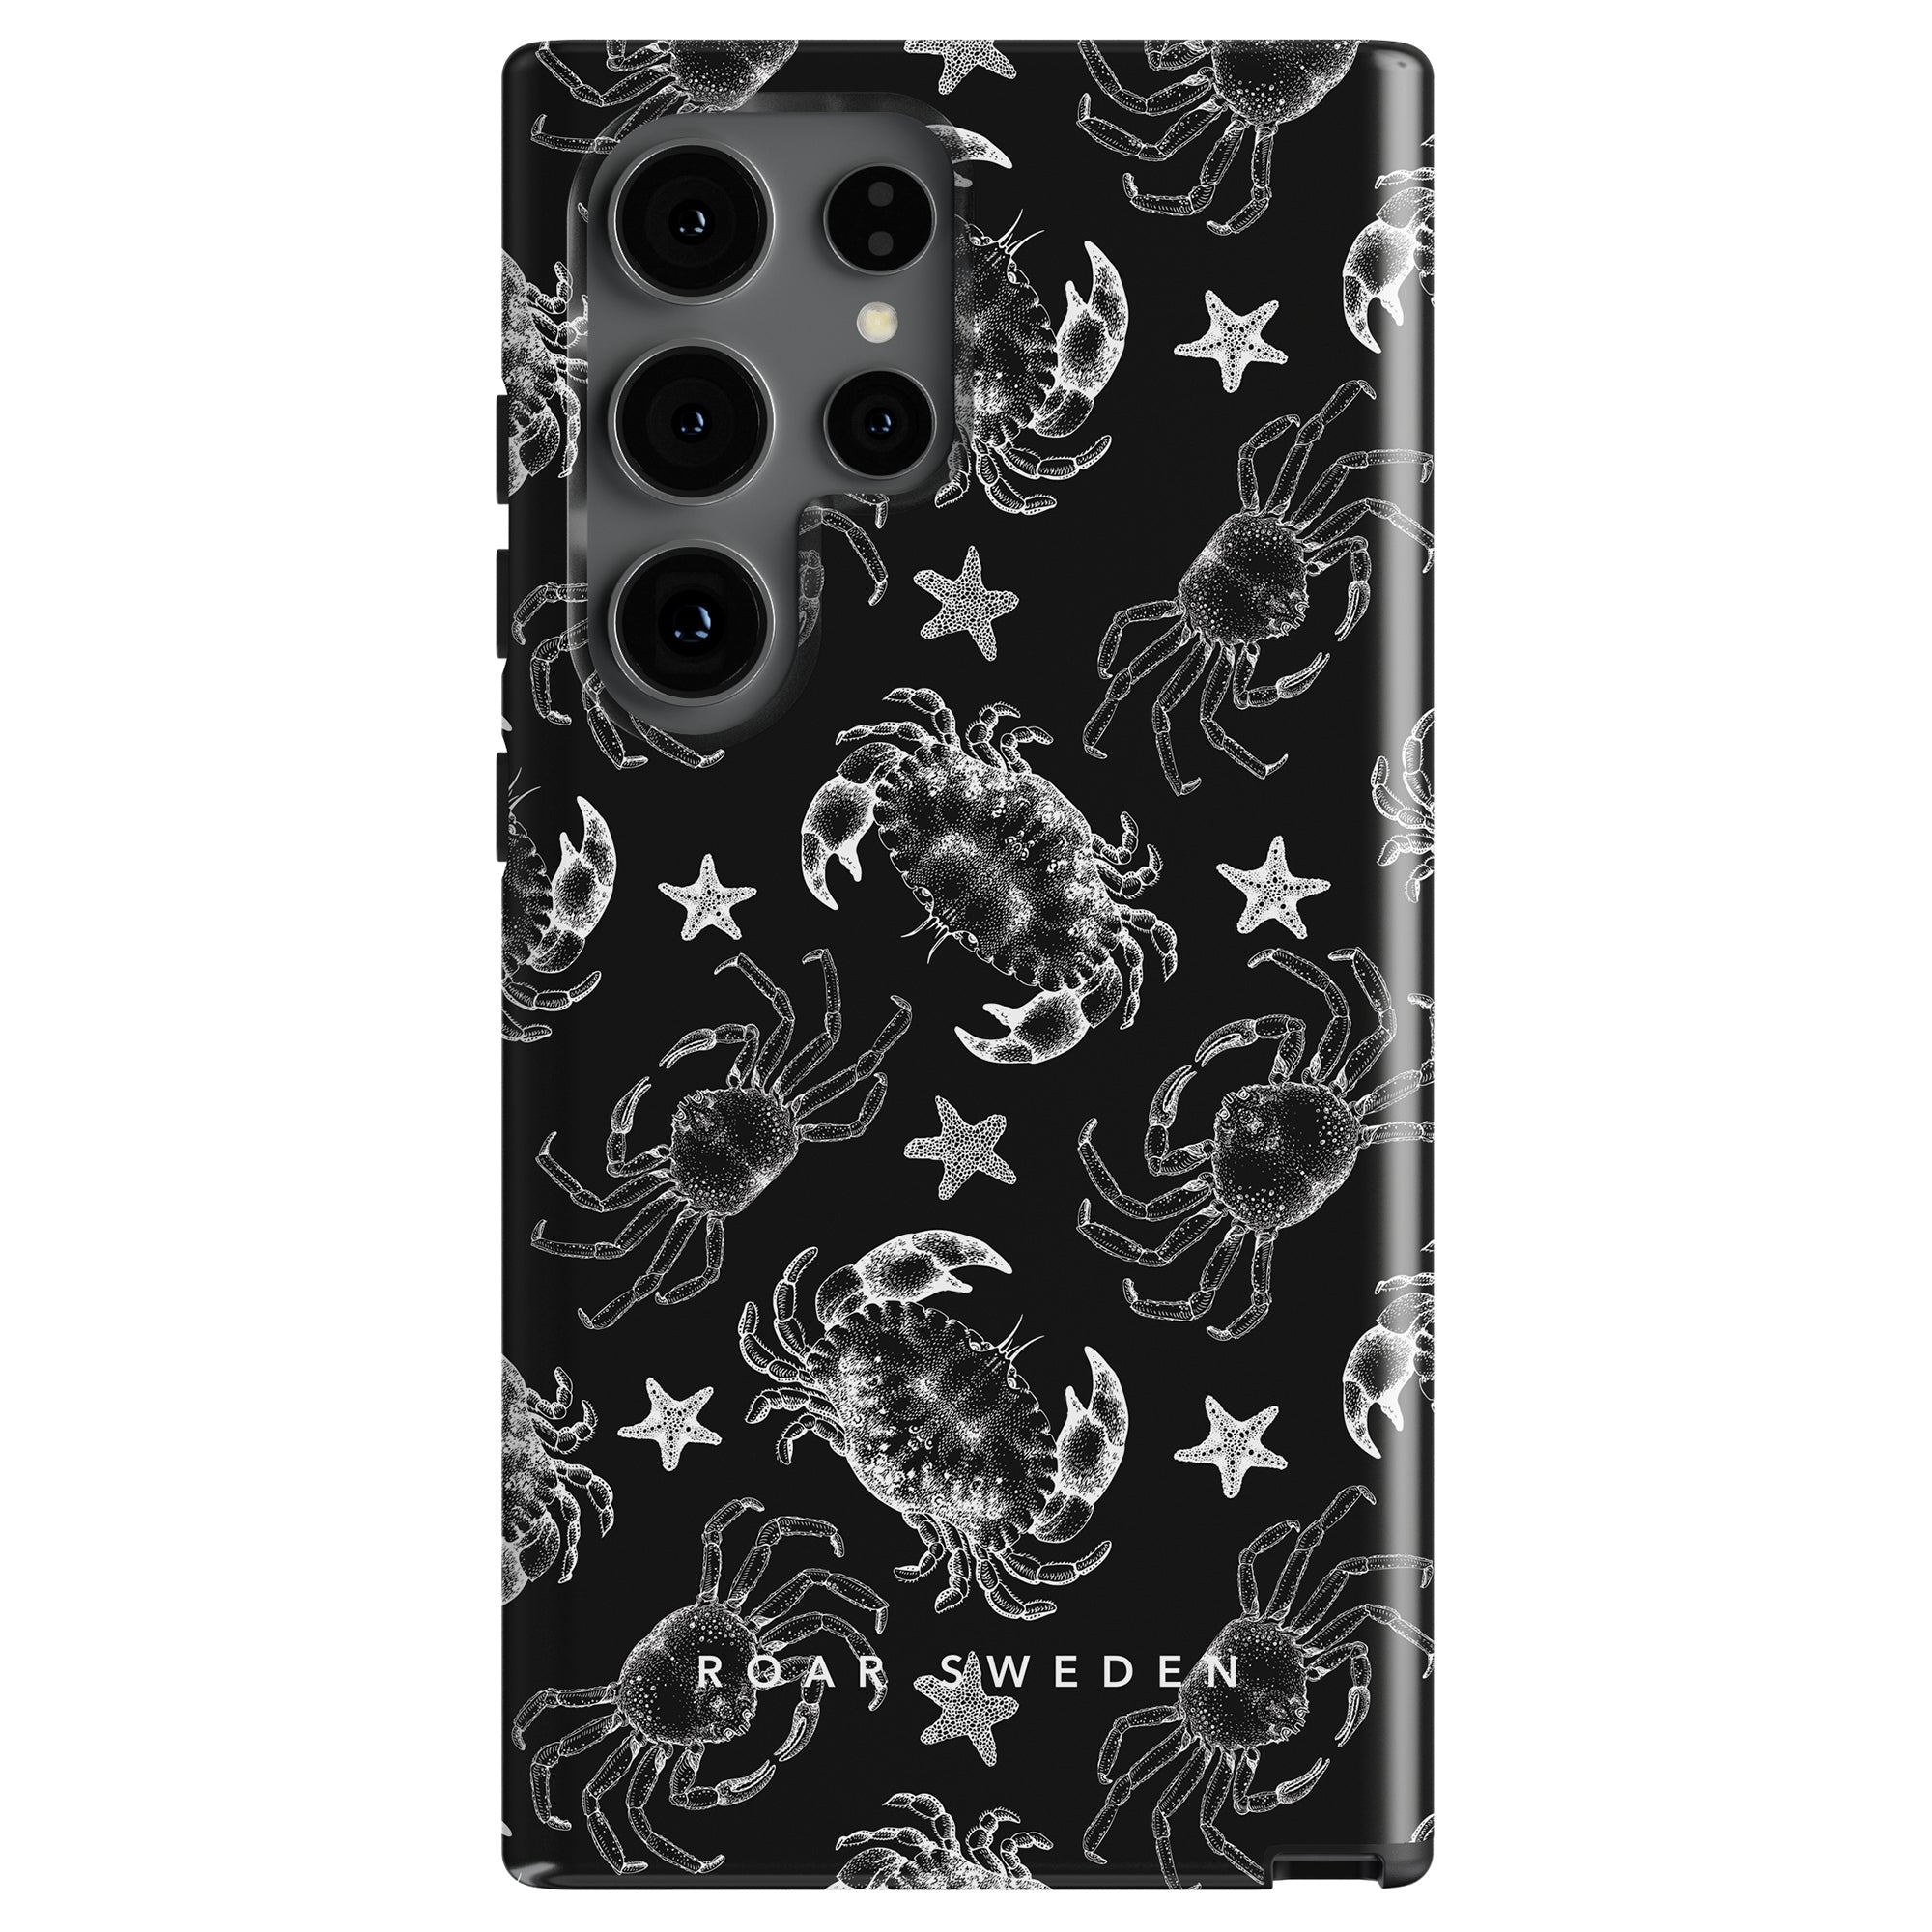 Black Crab - Tough Case: A black smartphone case with a pattern of white crabs and starfish, designed by ROAR Sweden. Part of the Ocean Collection, this robust mobilskal offers both style and protection.